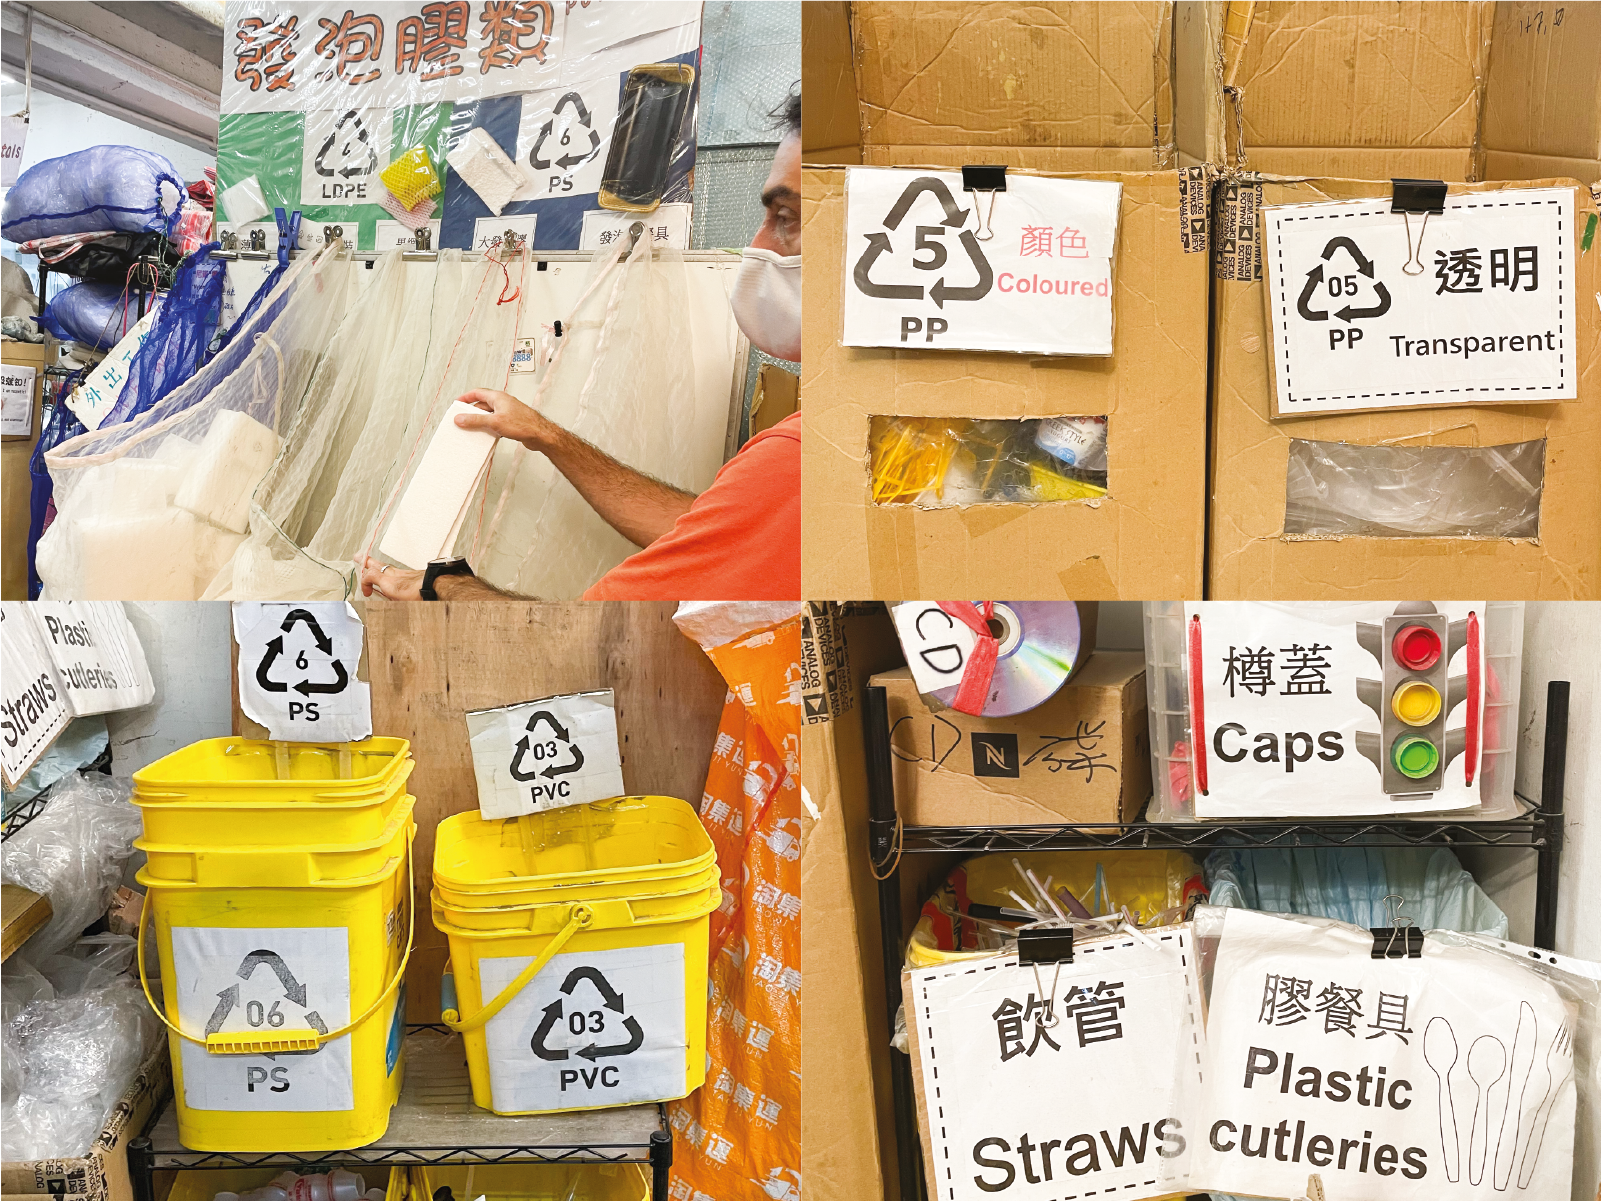 Missing Link, Polyfoam Recycling Scheme is located at Tsuen Wan